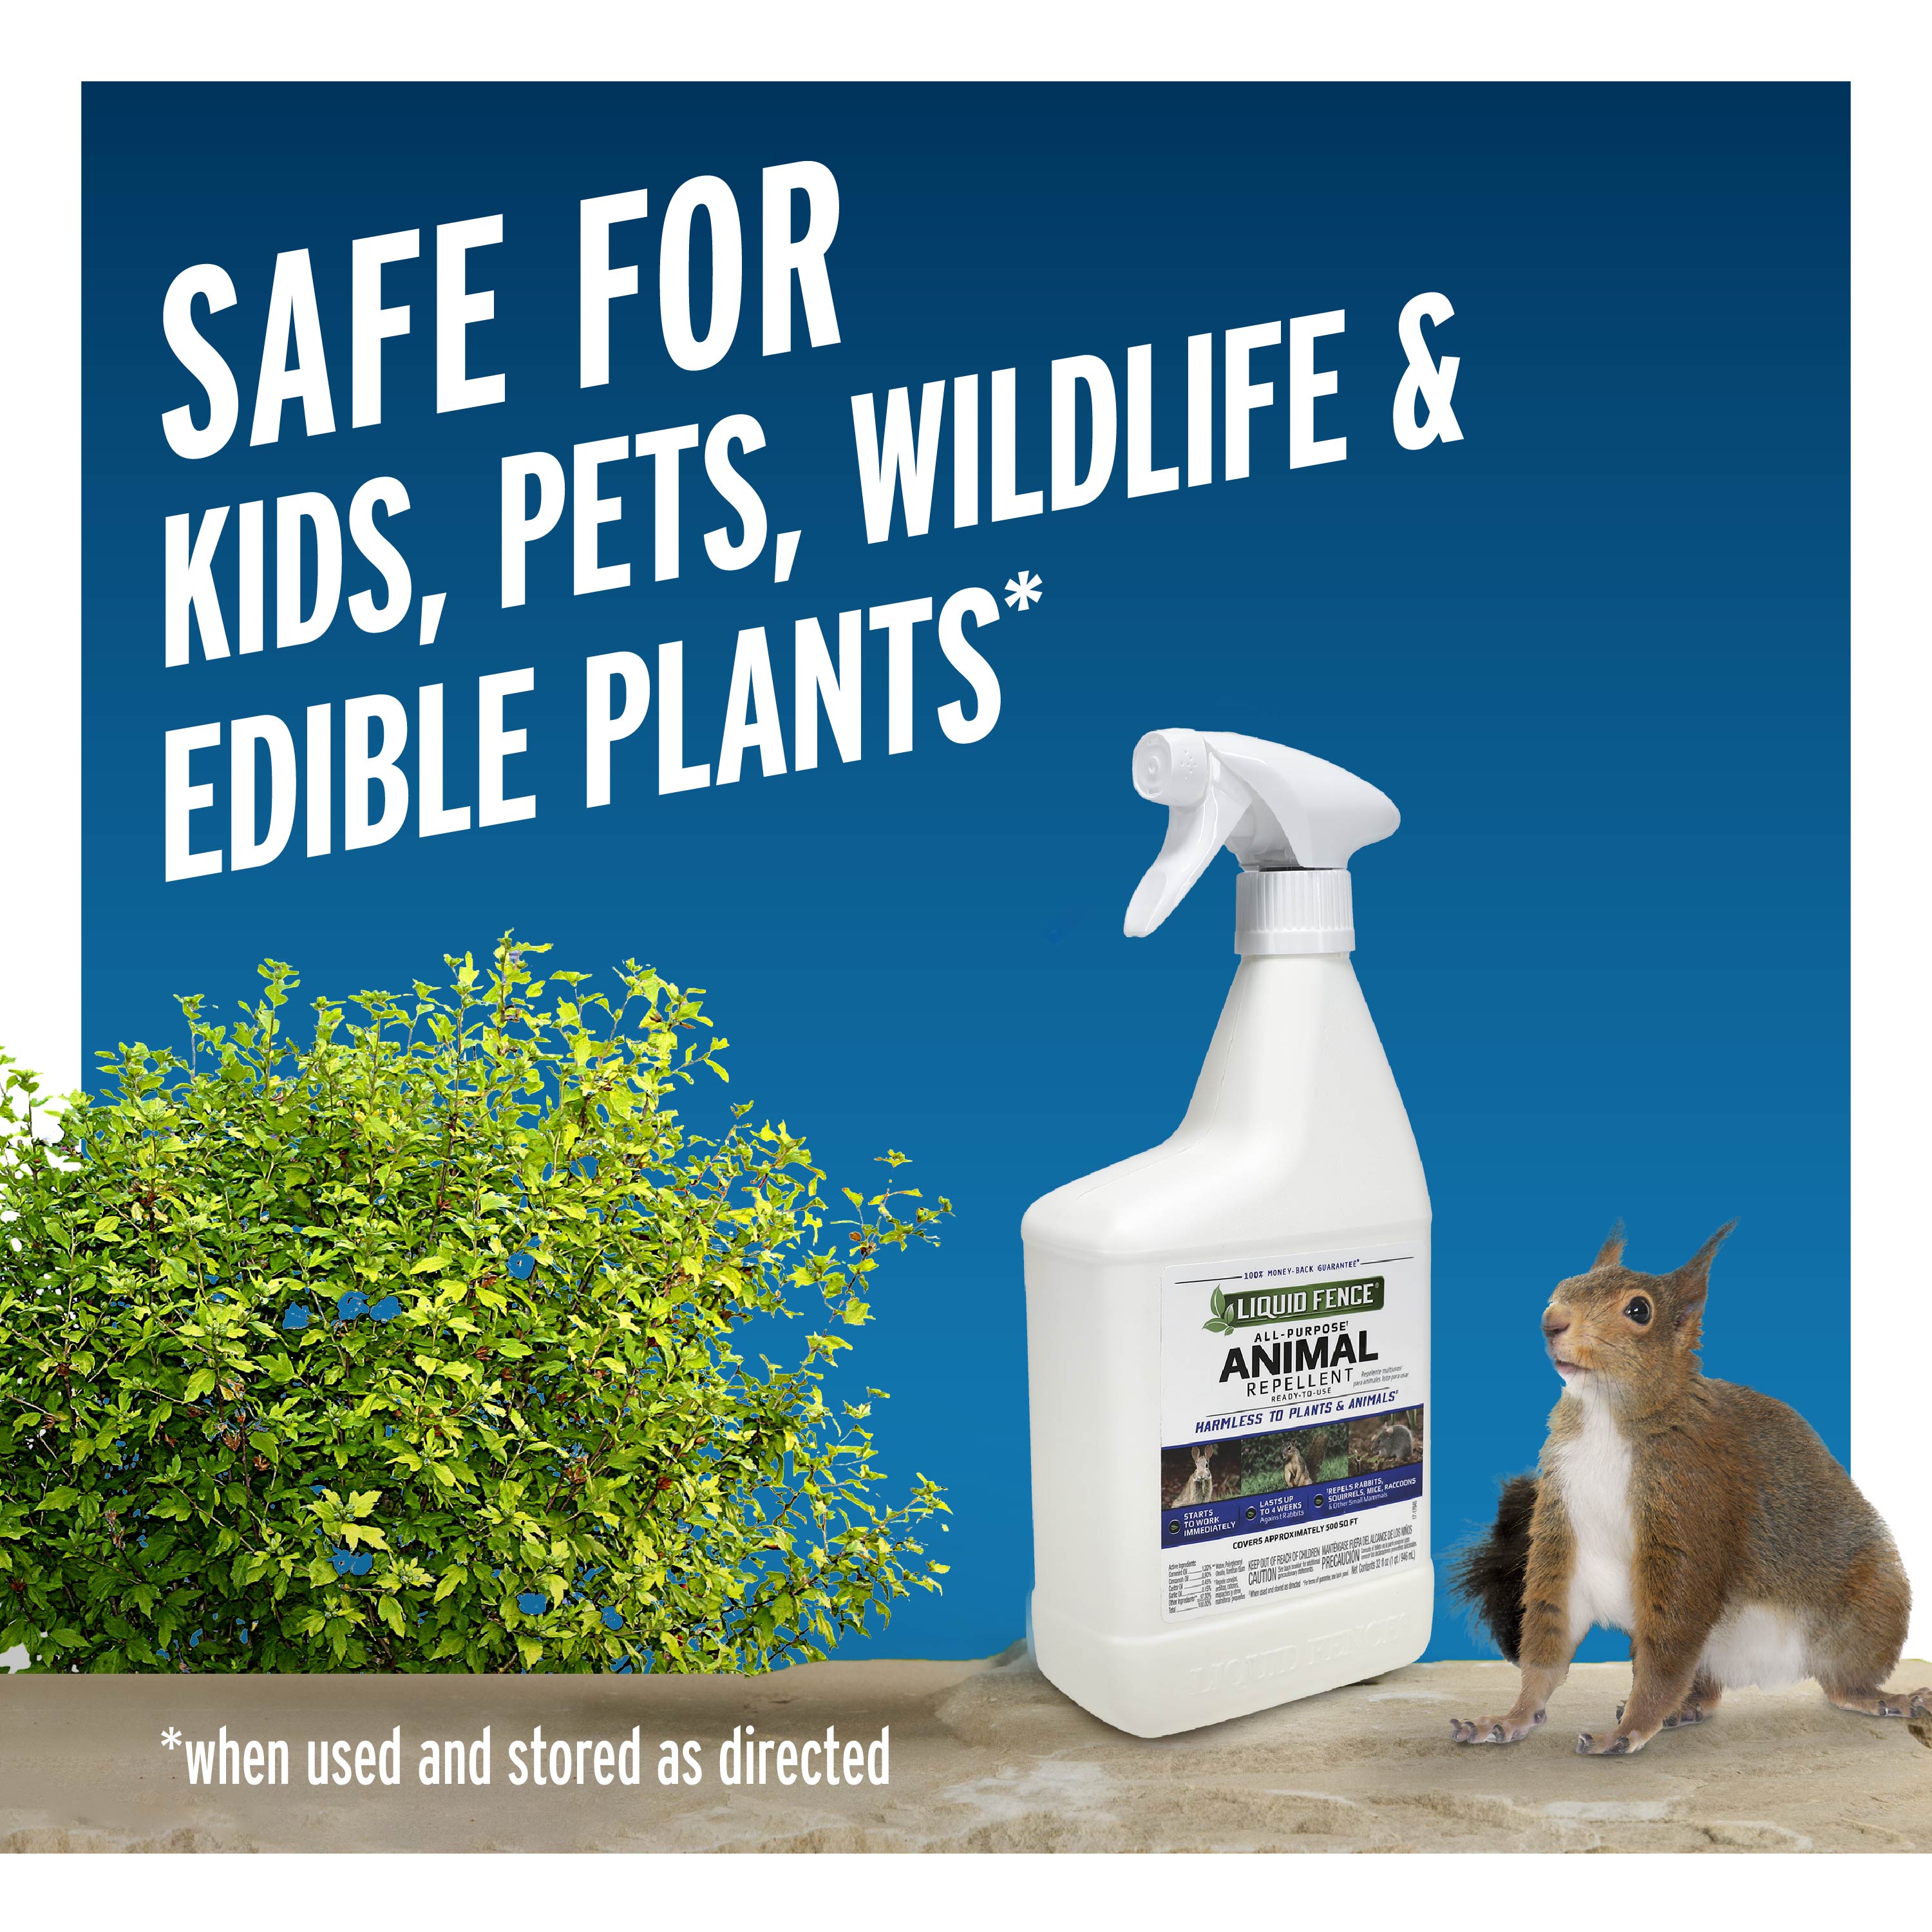 safe for kids, pets, wildlife and edible plants